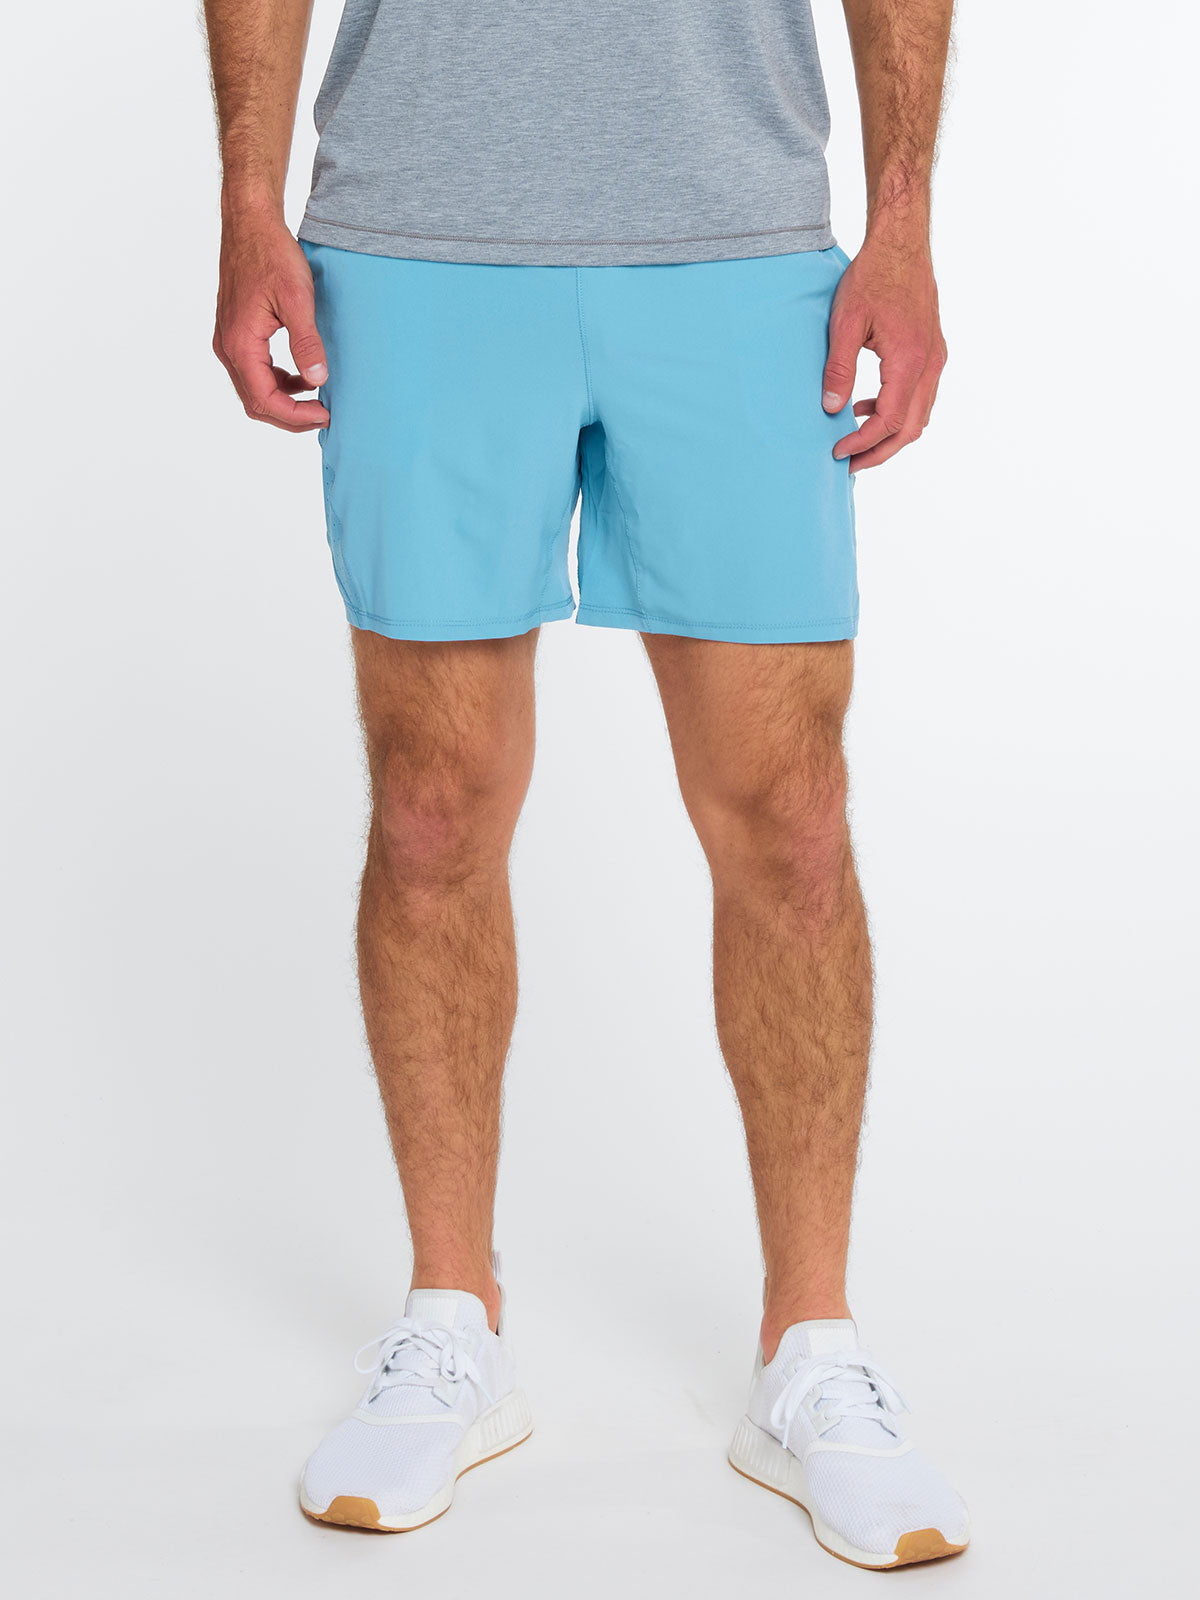 Weightless 7in Unlined Short tasc performance (LakeBlue)